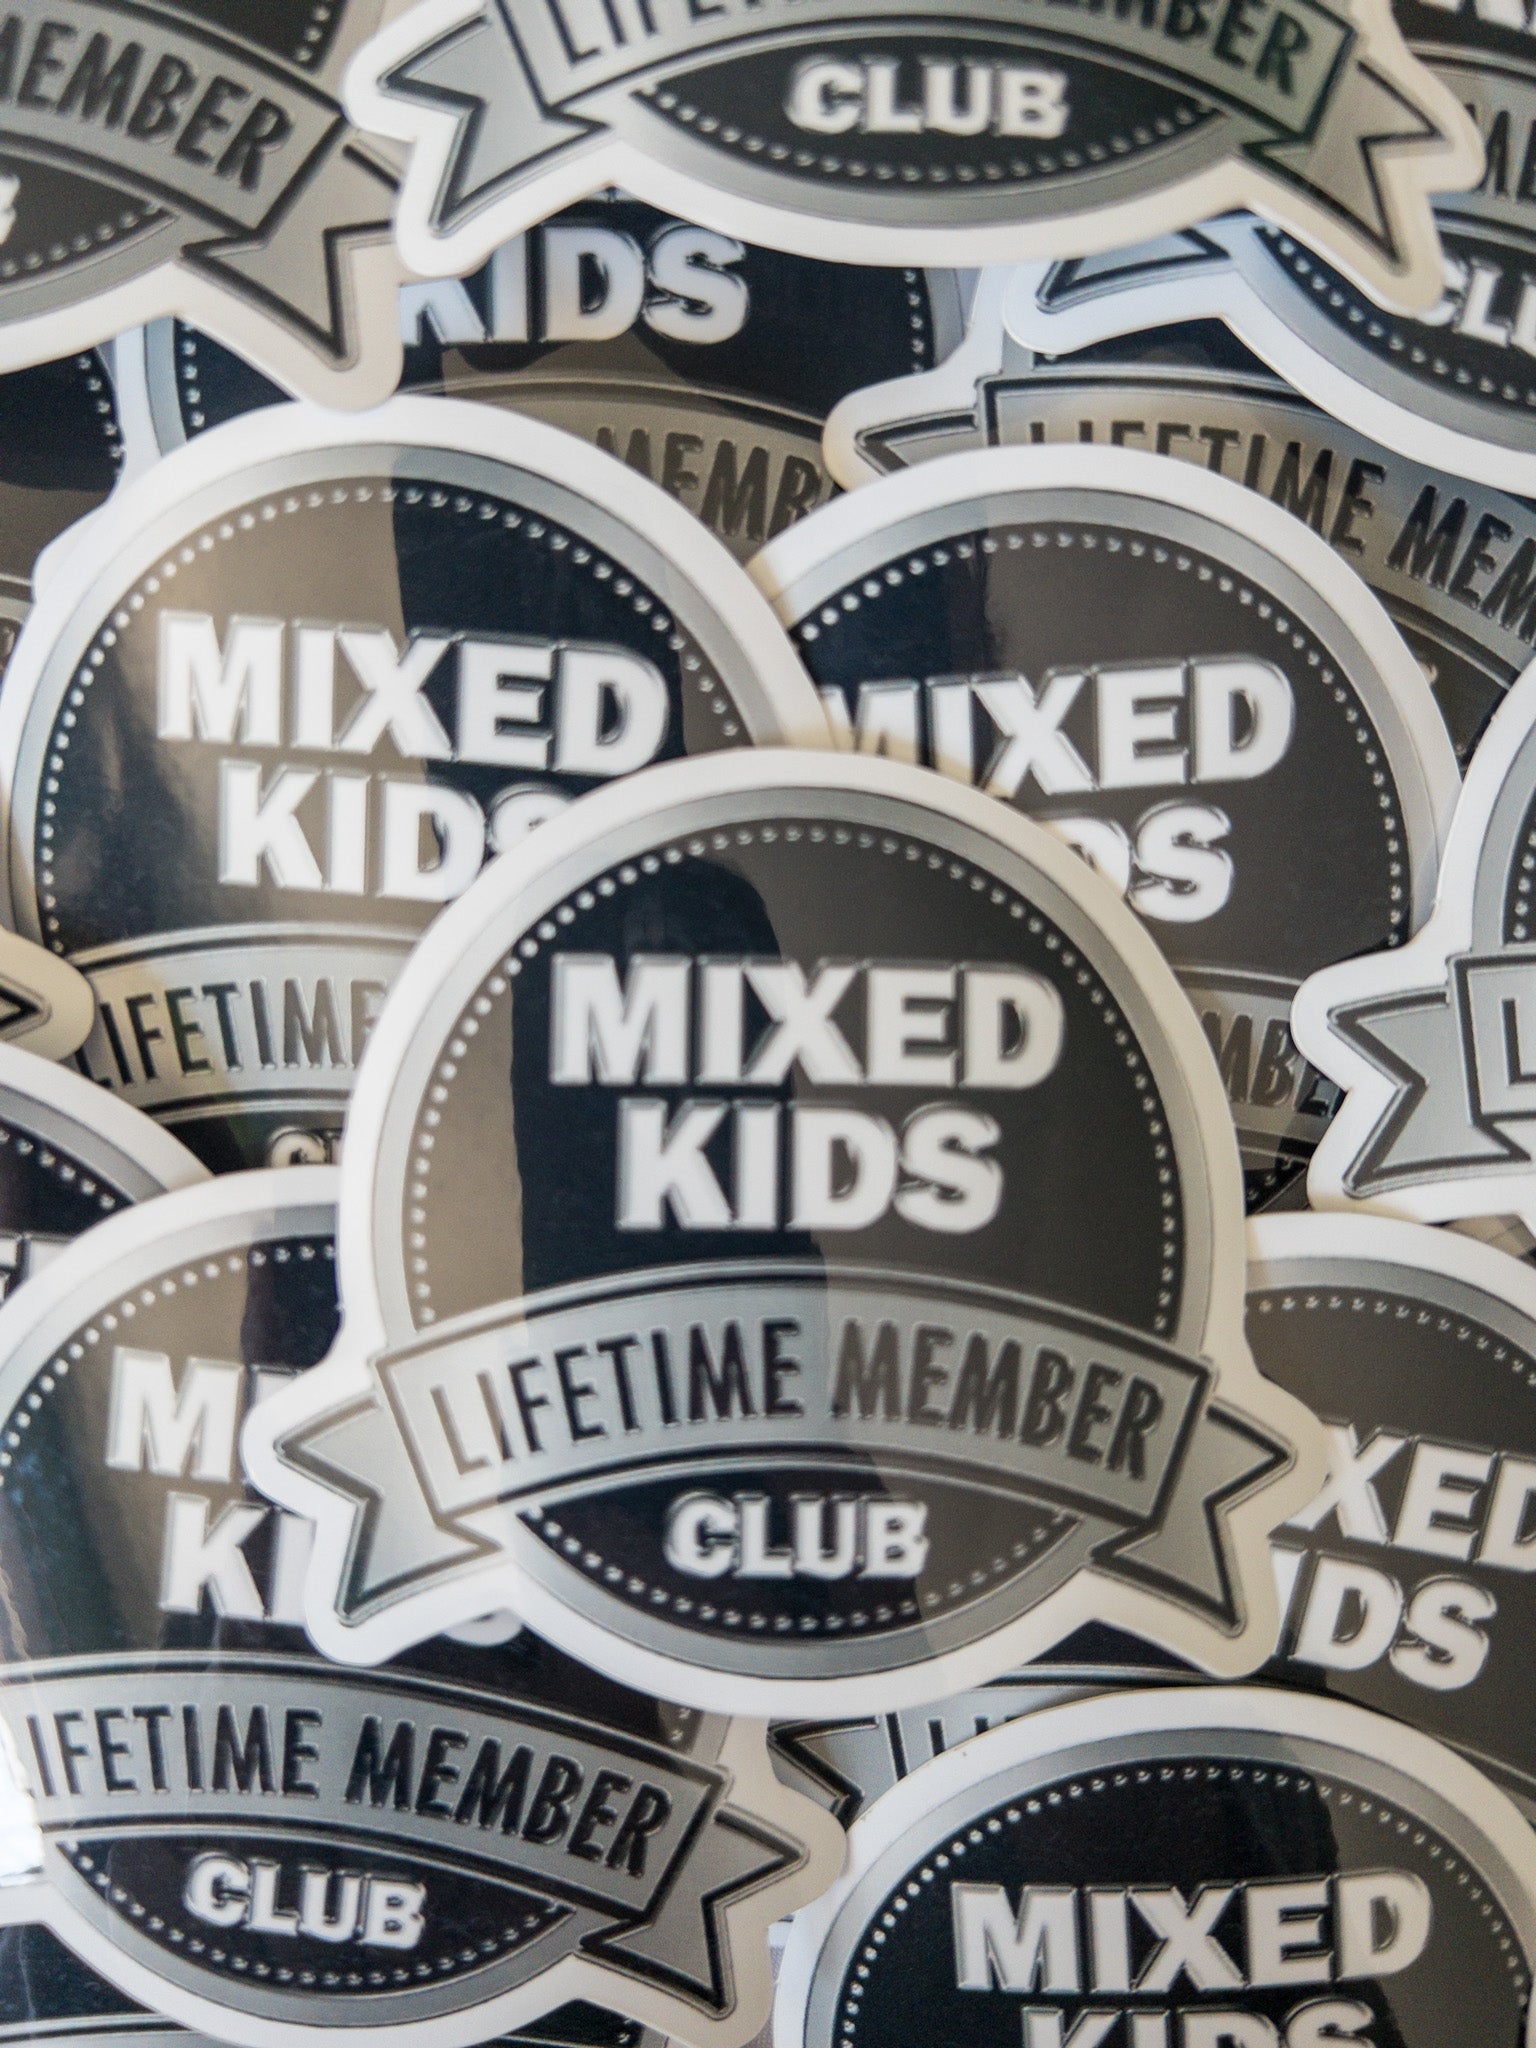 Mixed Kids Club Member Sticker - Mosaic the Label